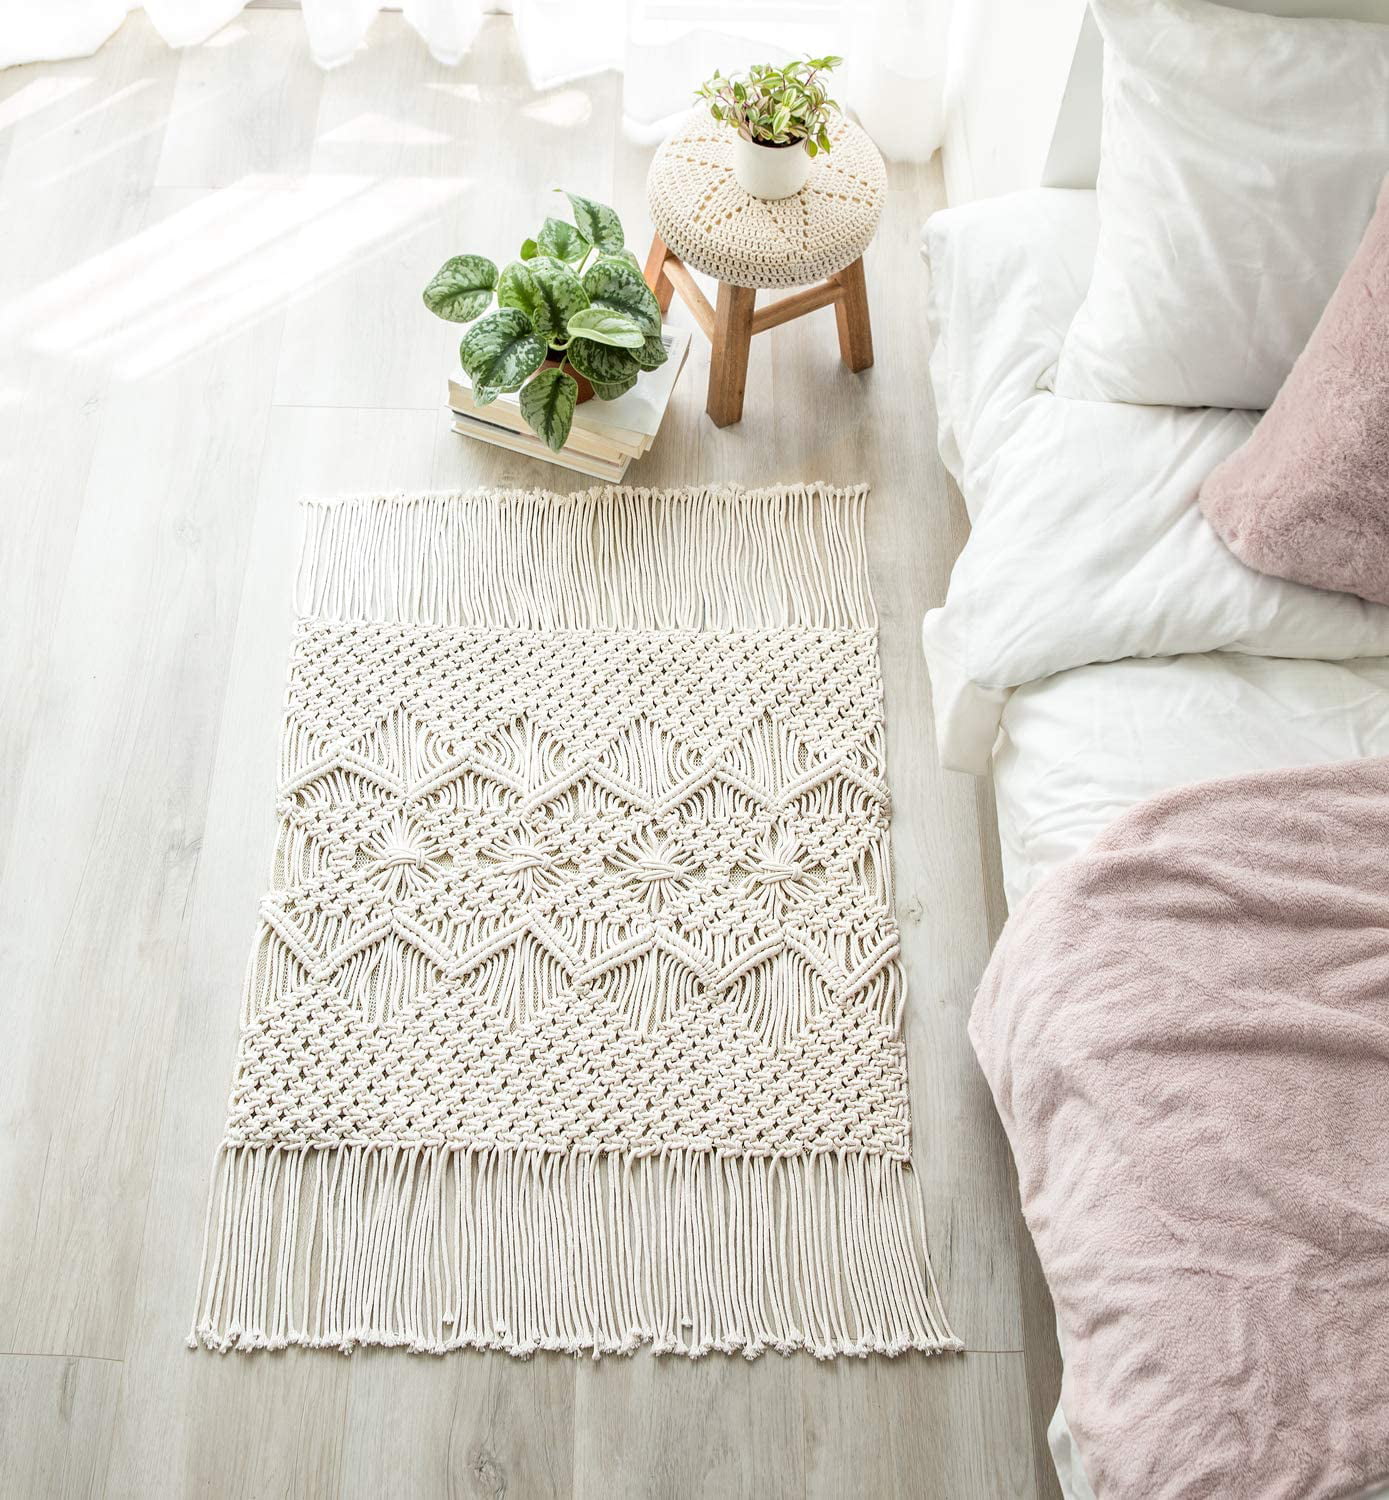 Macrame Rug Boho Area Rugs Cotton Woven, Small Area Rugs For Entryway